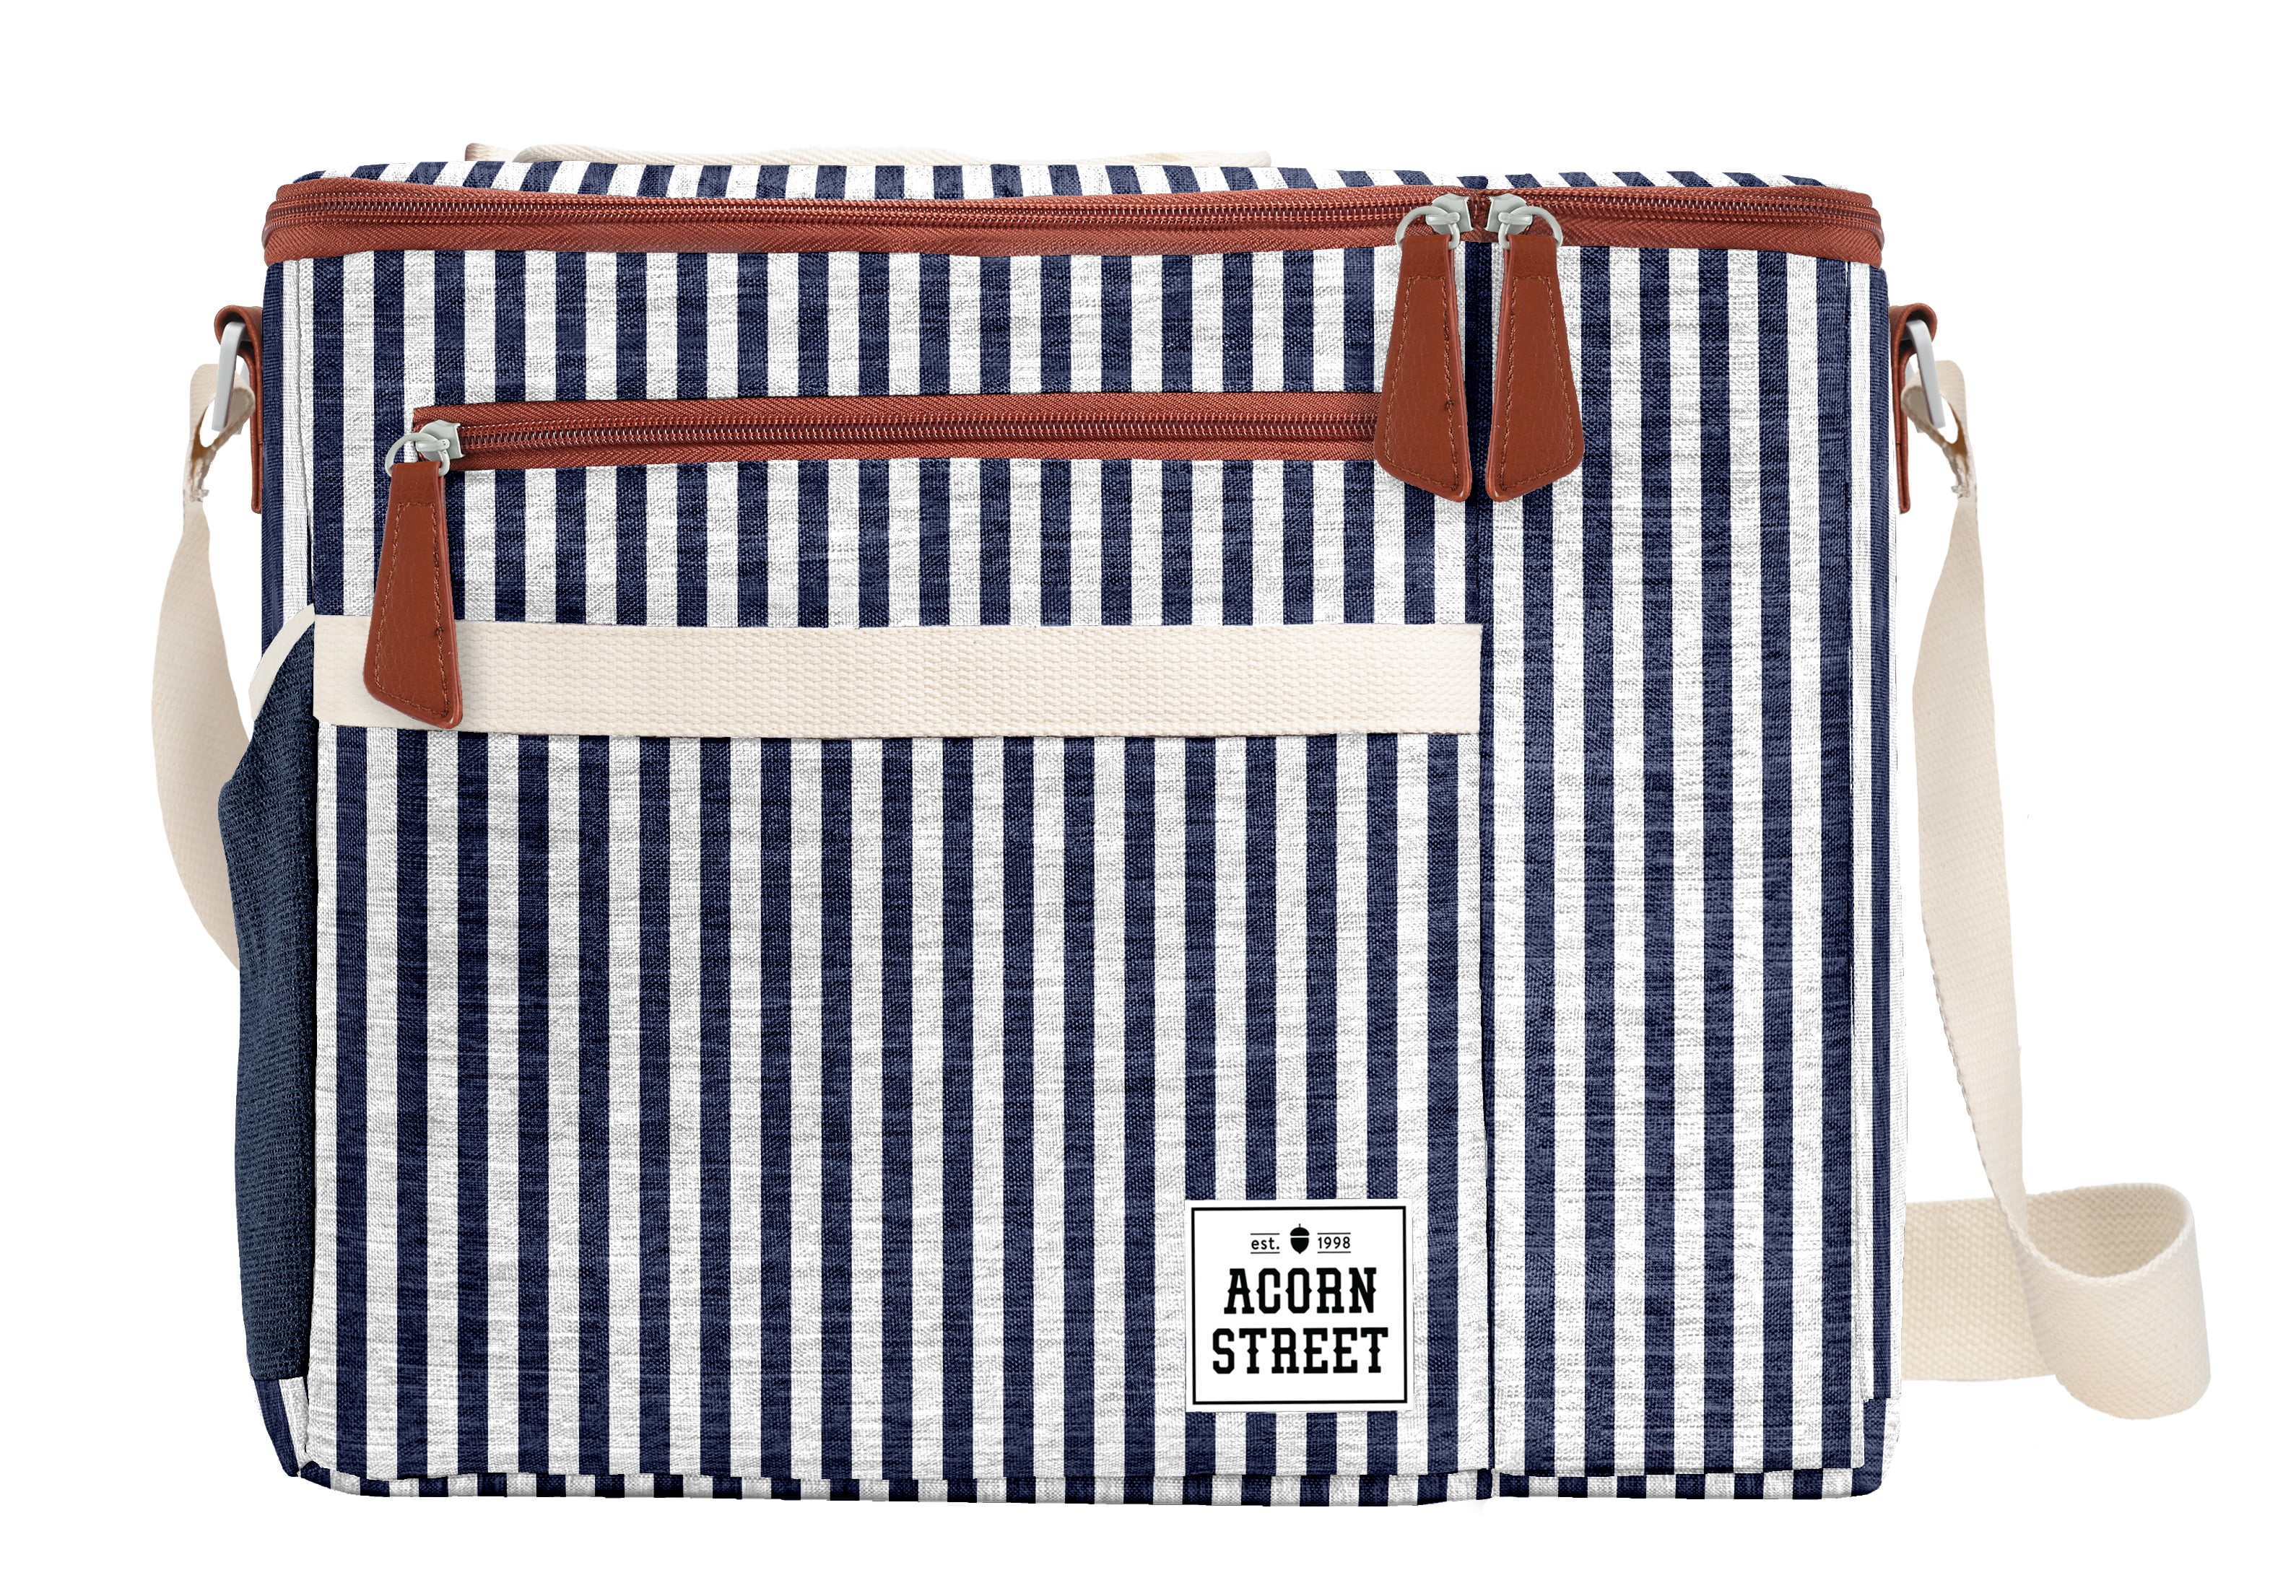 Acorn Street Dual-Compartment 2 Wine Bottles, 12-Can Soft Insulated Cooler in Blue Vineyard Stripe